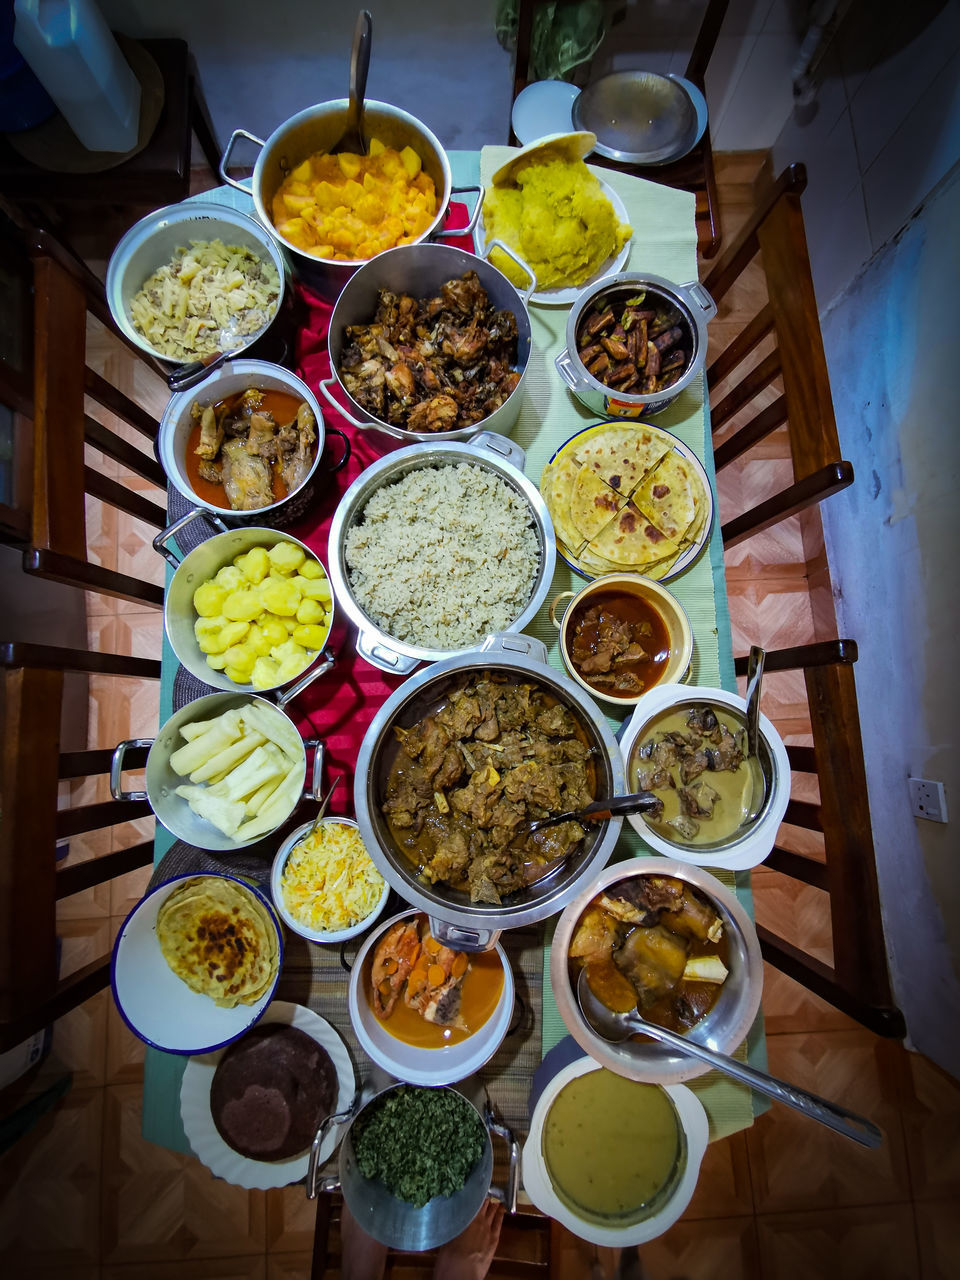 food, food and drink, high angle view, healthy eating, wellbeing, freshness, table, variation, indoors, no people, meal, bowl, directly above, dish, vegetable, asian food, cuisine, still life, abundance, plate